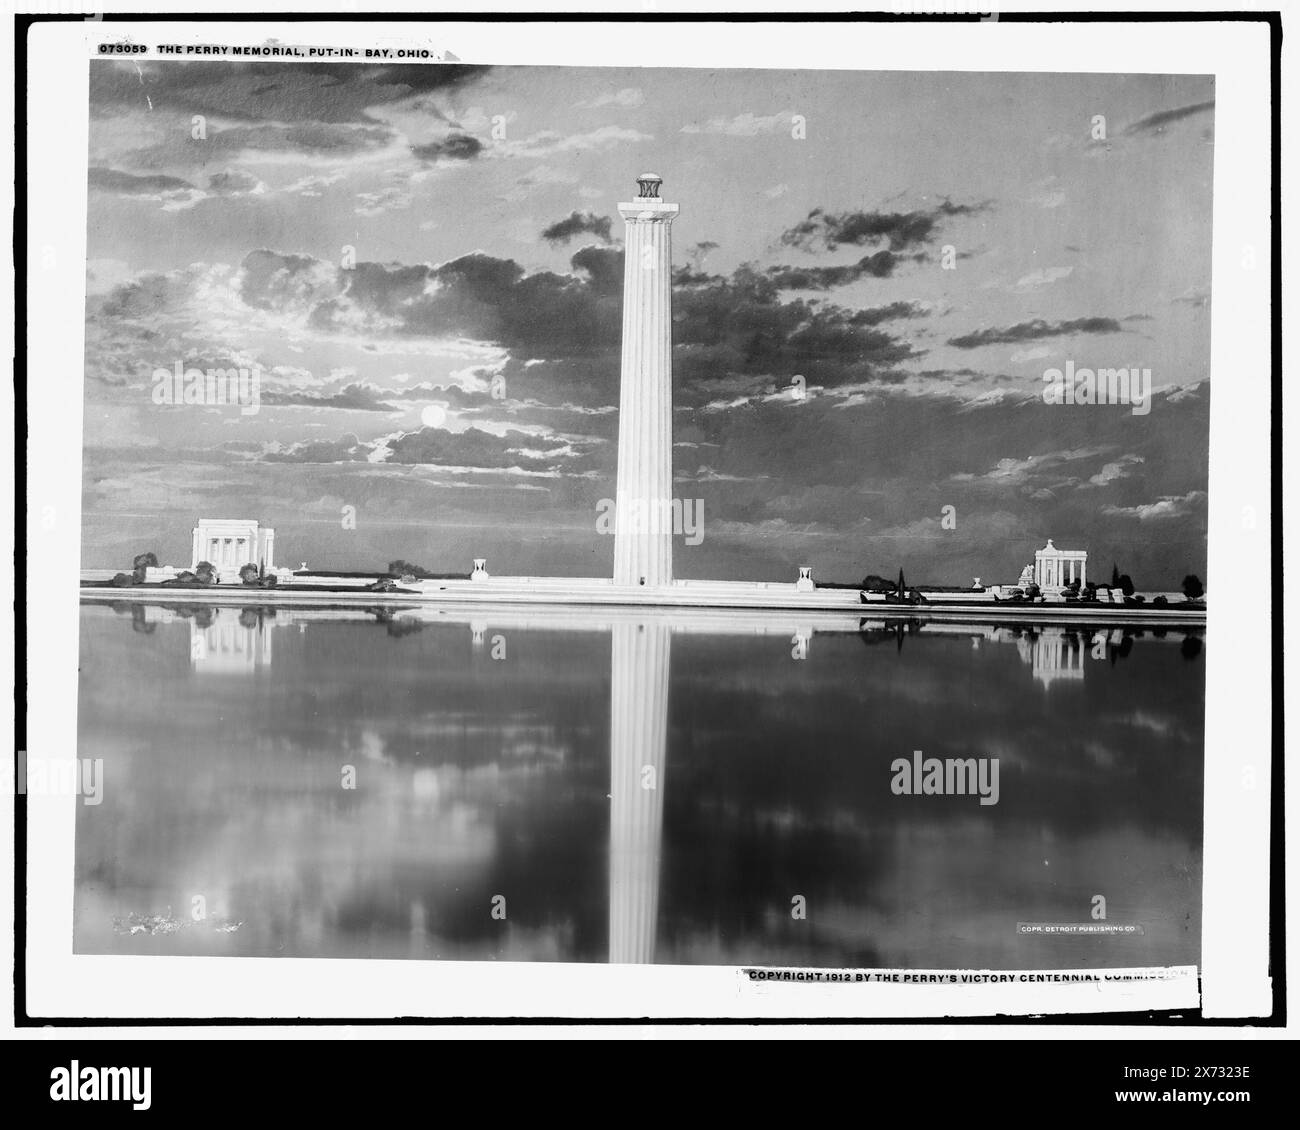 The Perry Memorial, Put-In-Bay, Ohio, Detroit Publishing Co. no. 073059., Gift; State Historical Society of Colorado; 1949,  Monuments & memorials. , Lake Erie, Battle of, 1813. , Waterfronts. , Reflections. , United States, Ohio, Put-In-Bay. Stock Photo